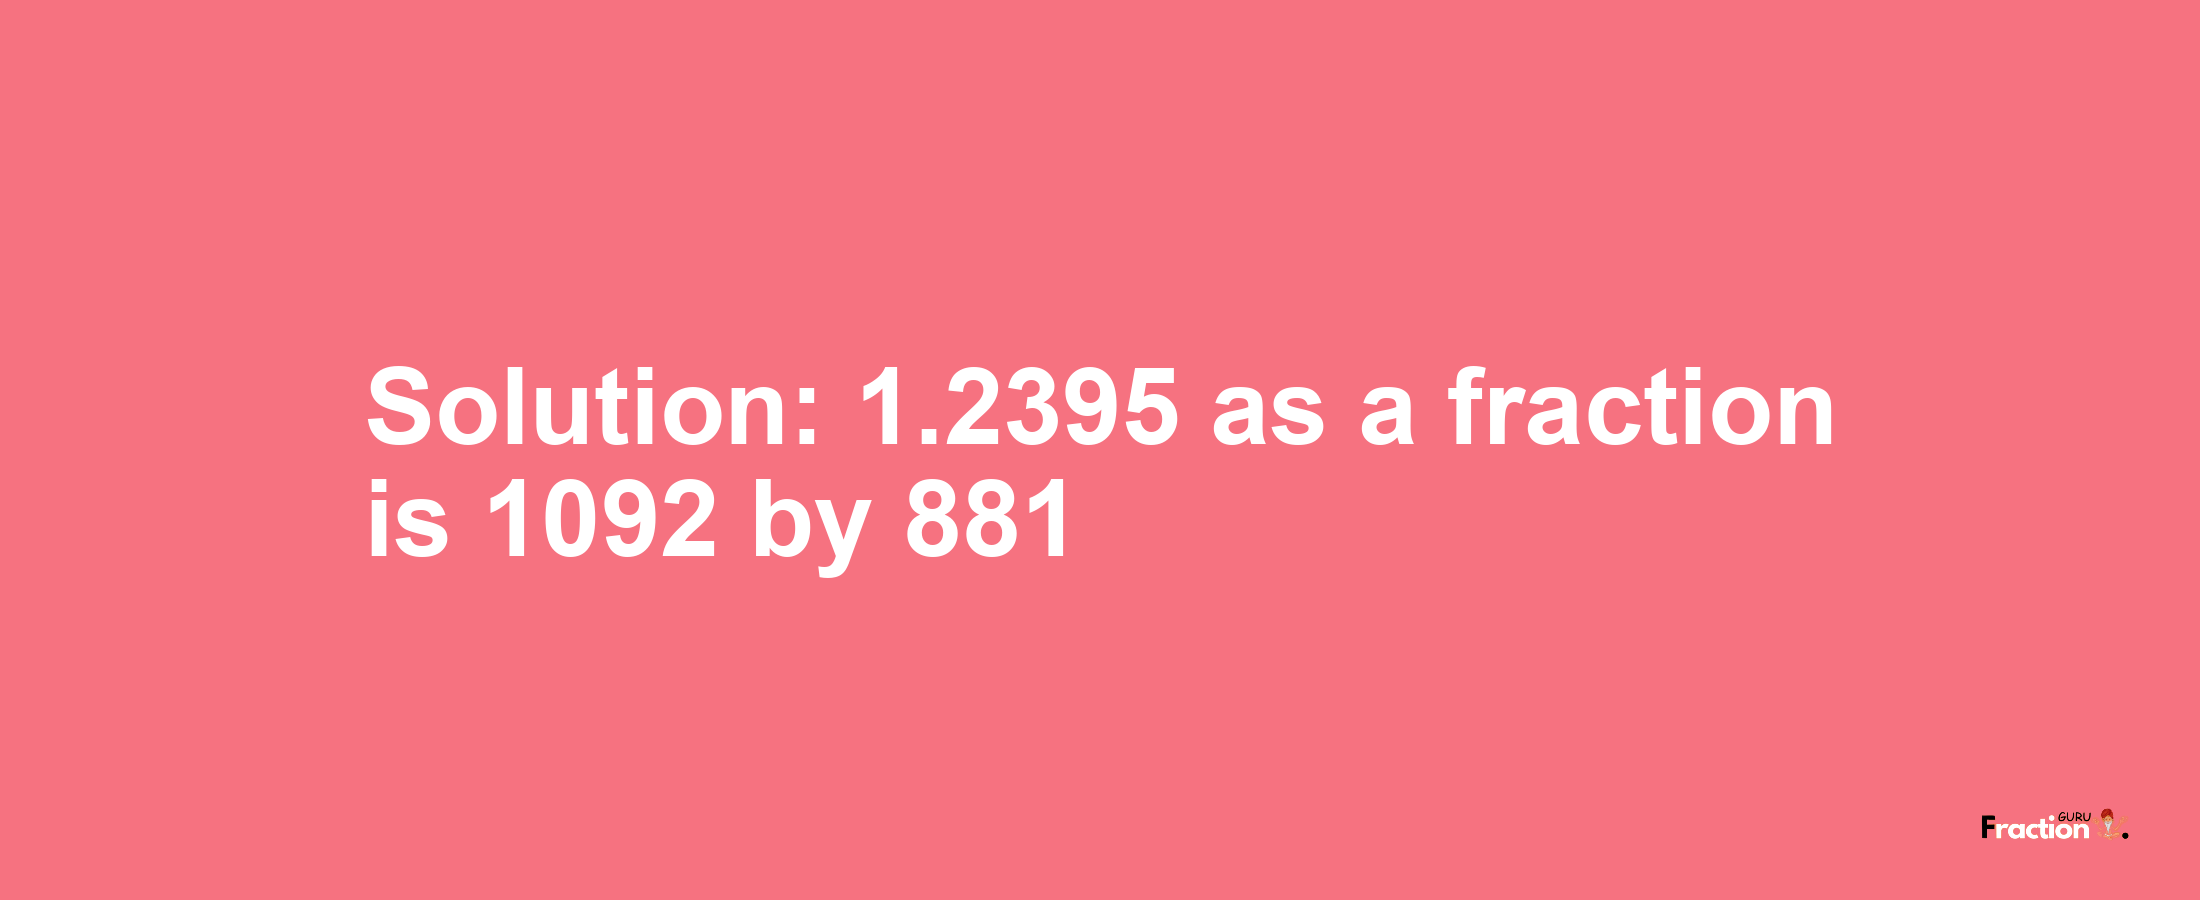 Solution:1.2395 as a fraction is 1092/881